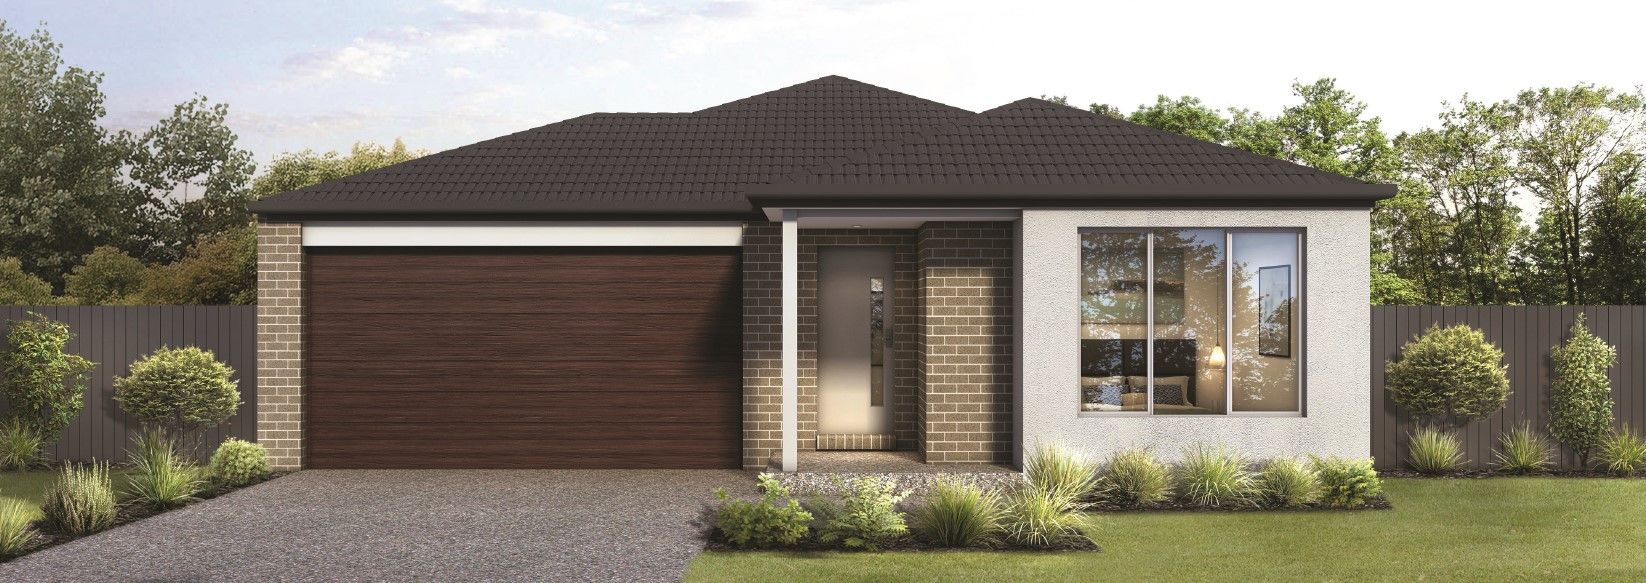 4 bedrooms New House & Land in Lot 1004 Attwell Estate DEANSIDE VIC, 3336